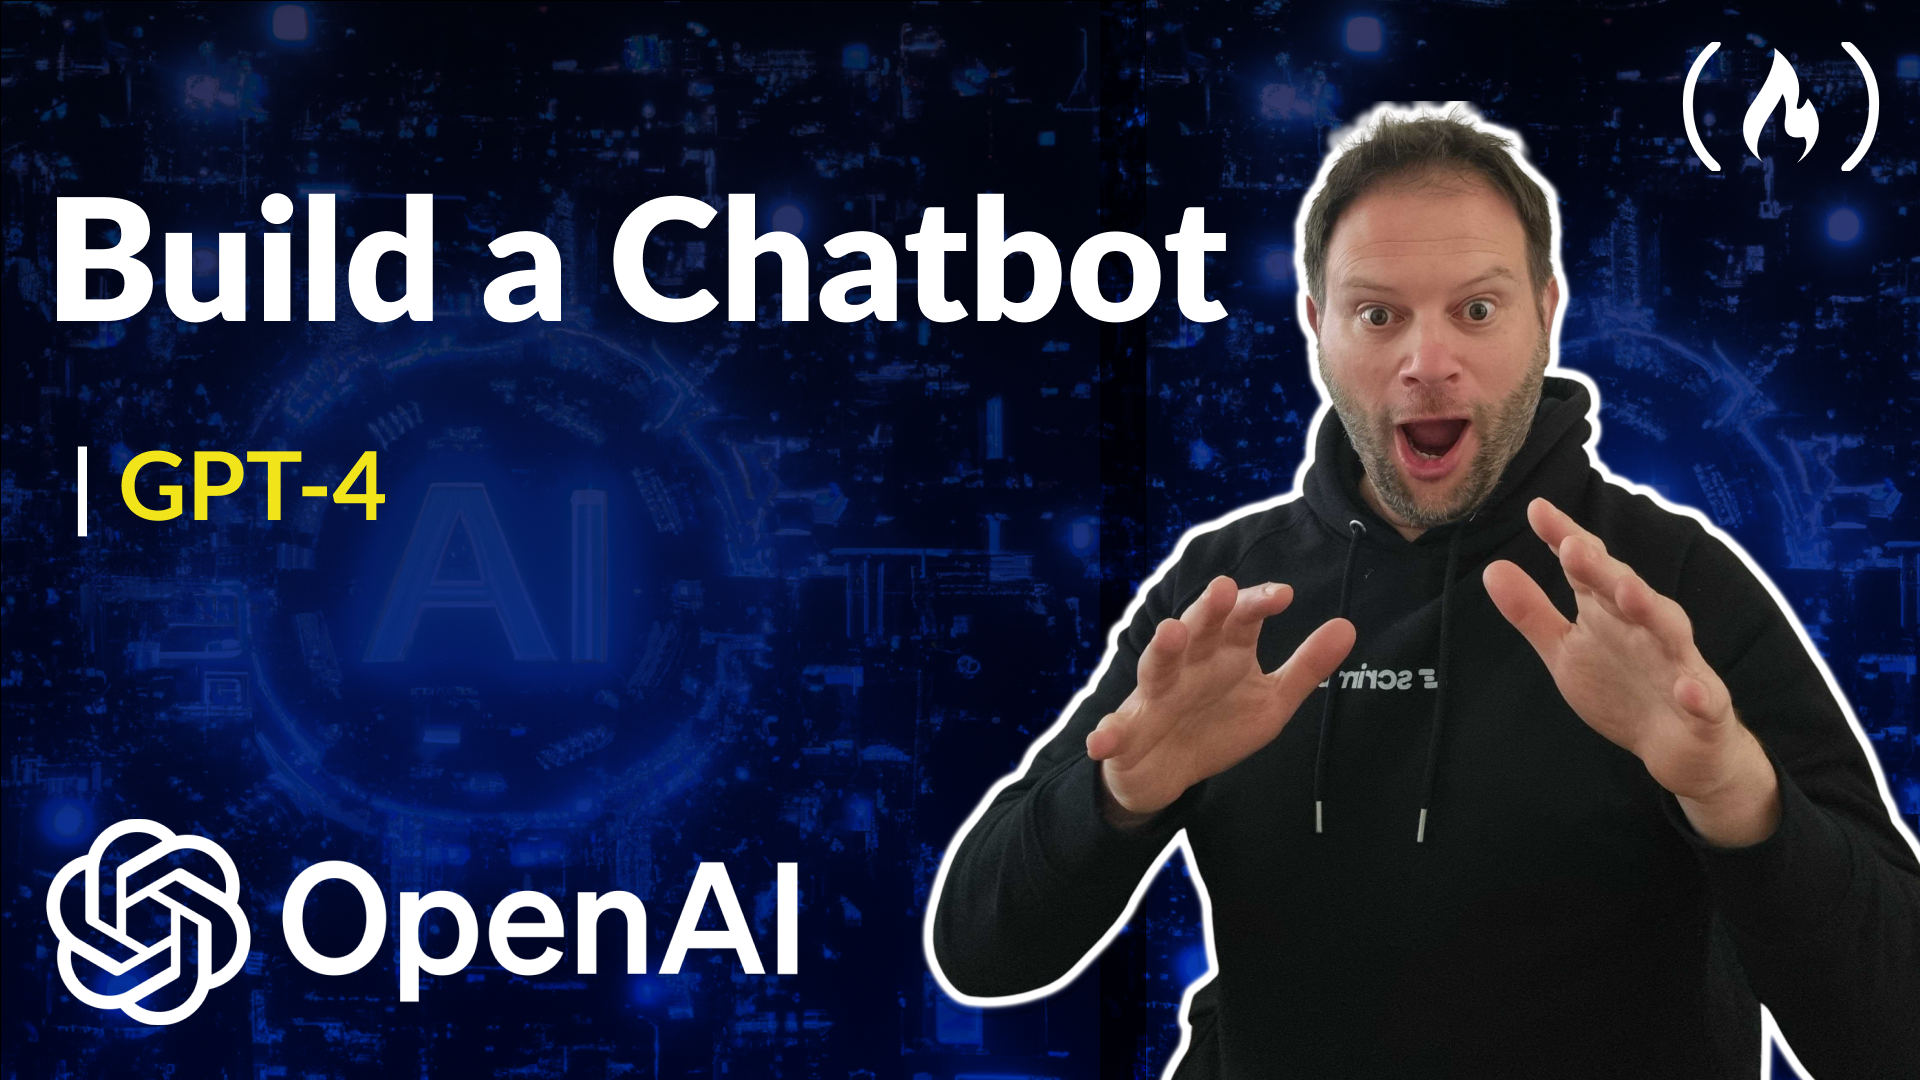 How to Build a ChatBot using the GPT-4 API – Full Project-Based Tutorial